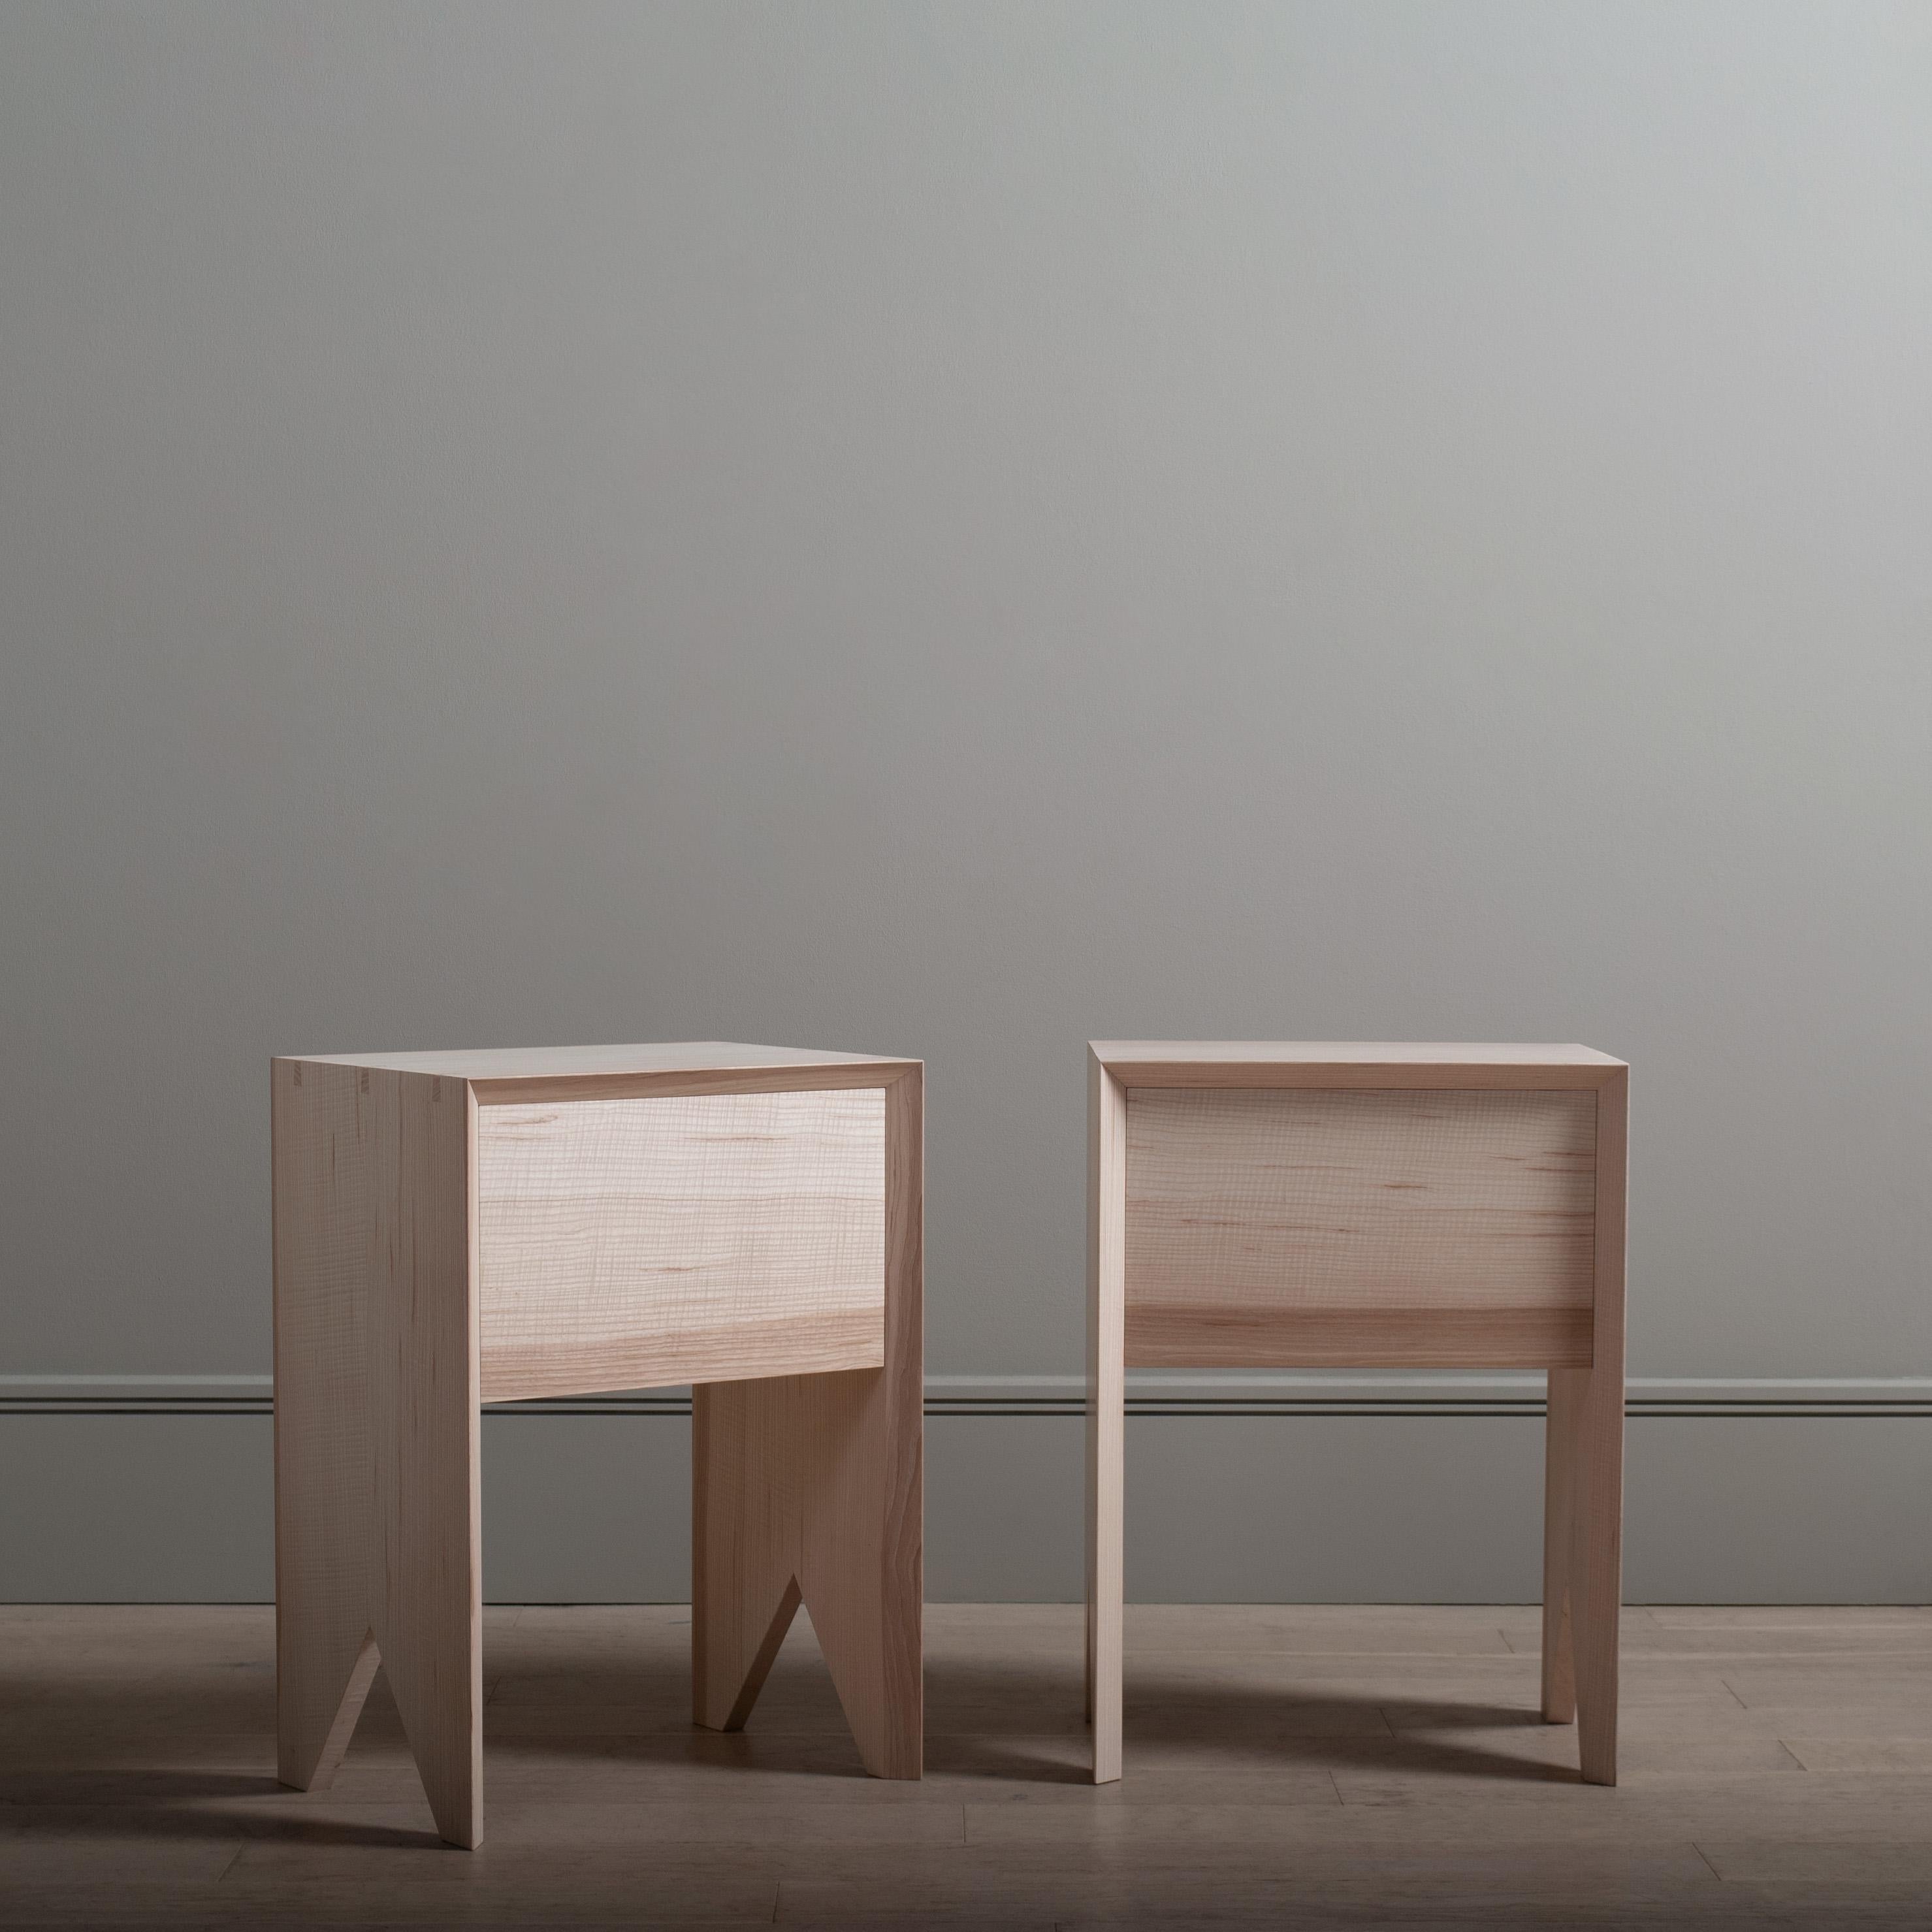 Paar Handcrafted English Ash End Tables / Drawers. im Zustand „Neu“ im Angebot in London, GB